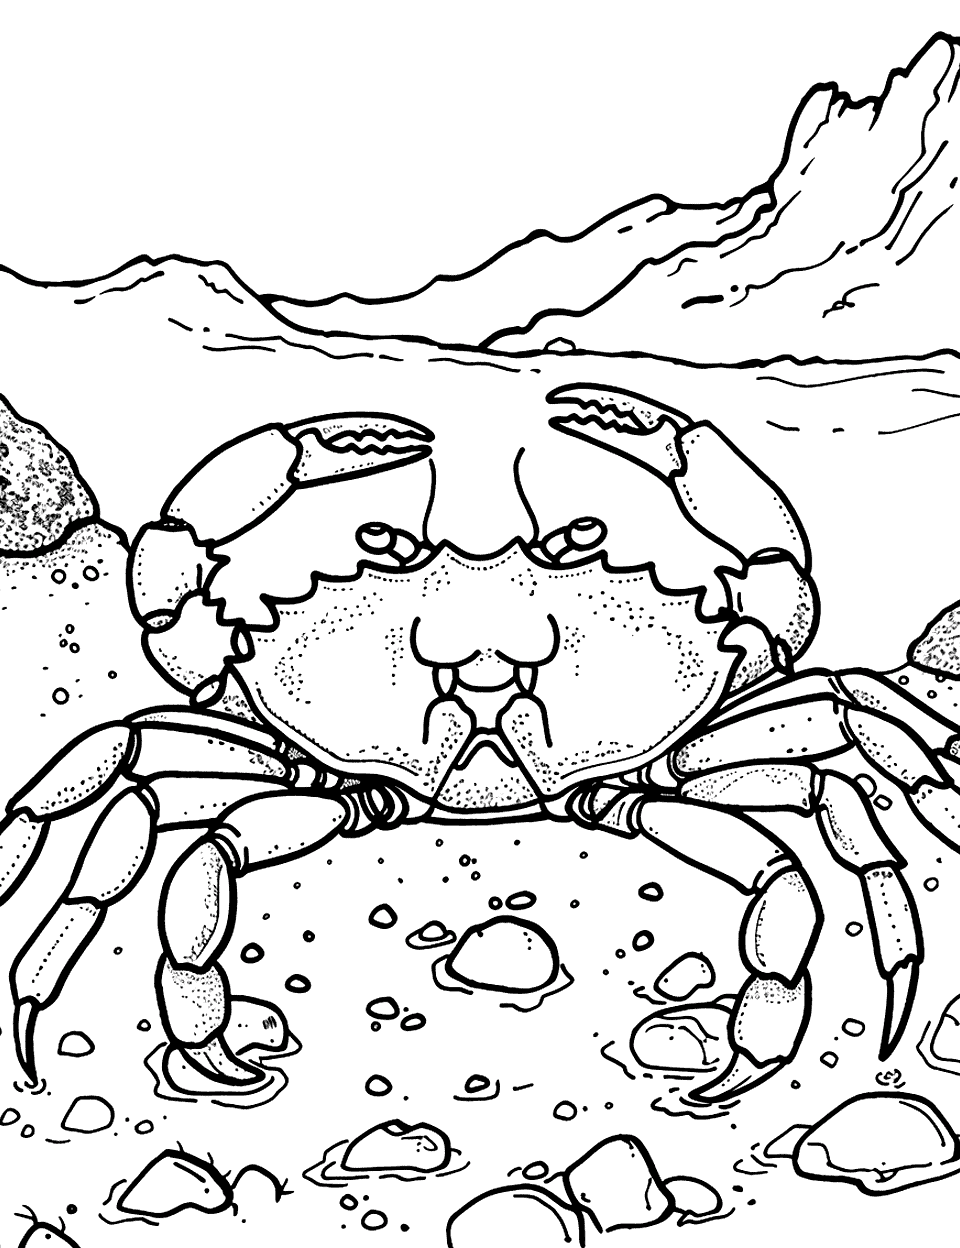 Rocky Shore Adventure Crab Coloring Page - A crab navigating the rocky terrain of a rugged shore.